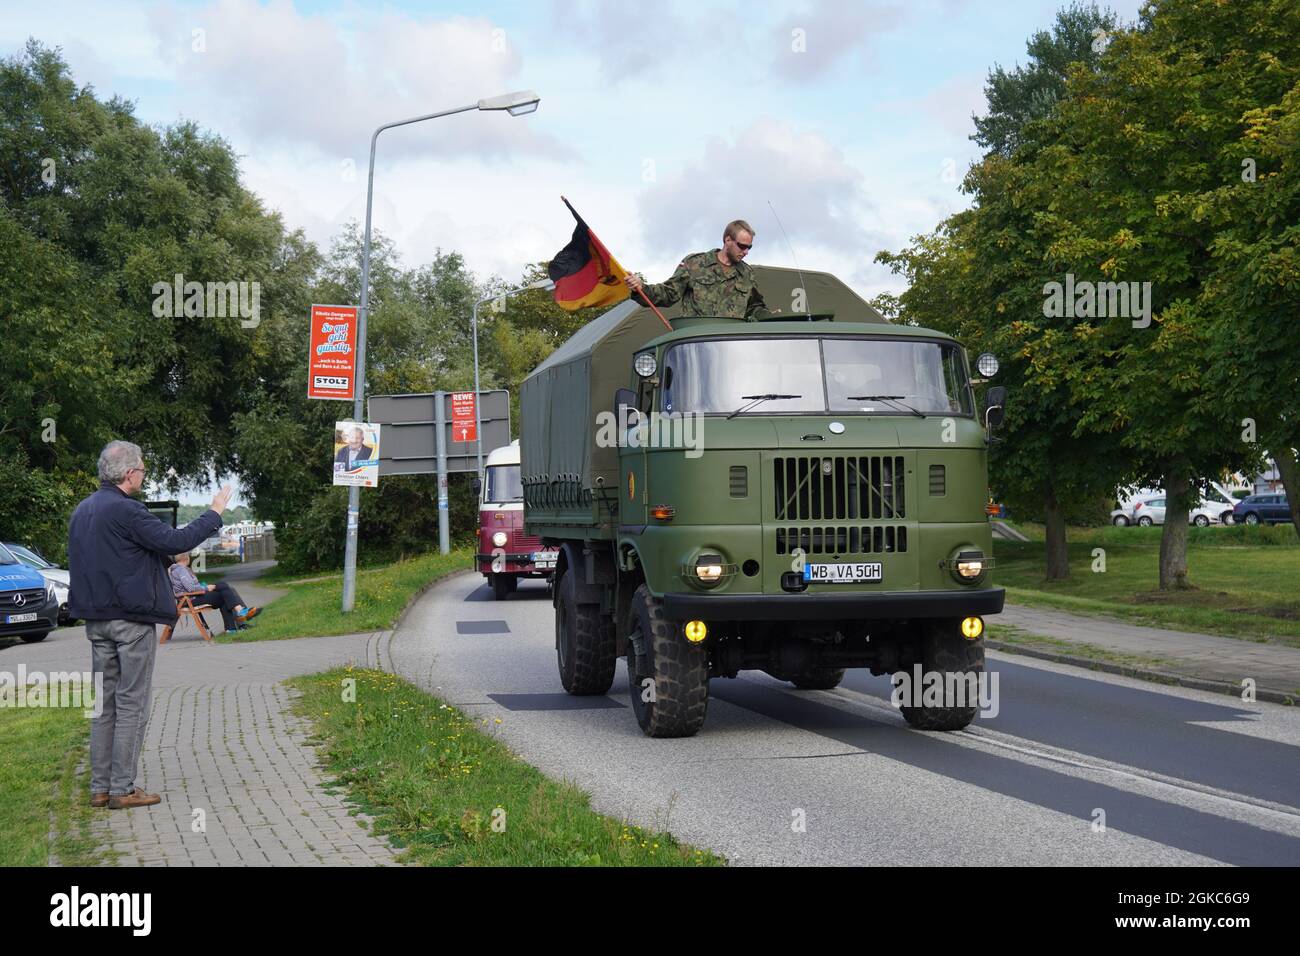 RIBNITZ DAMGARTEN, GERMANY - Aug 27, 2021: A large military truck with a German flag driving through a road in Ribnitz Damgarten, Germany Stock Photo